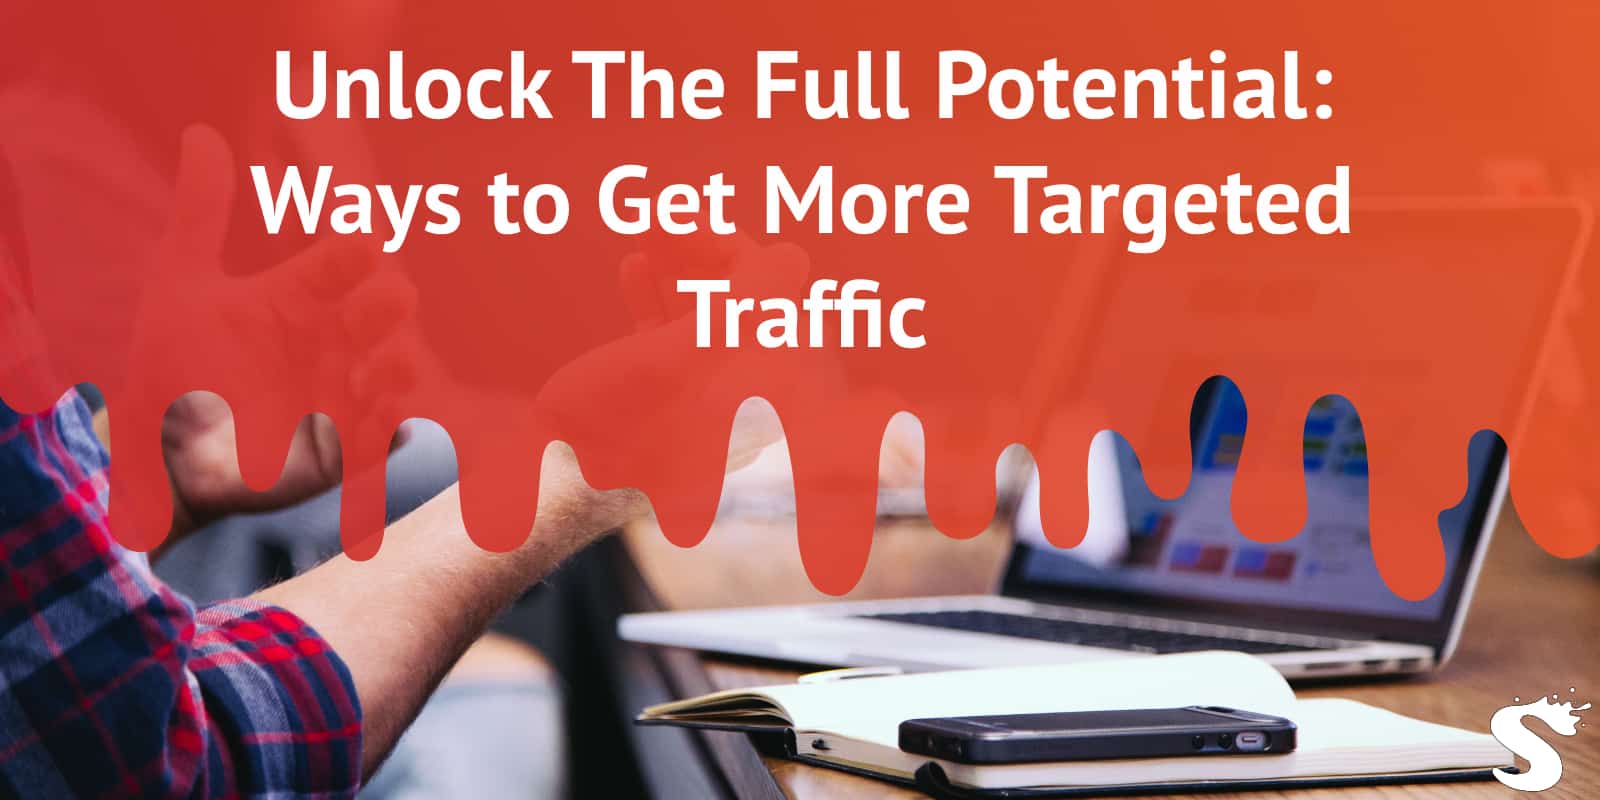 Unlock The Full Potential: Ways to Get More Targeted Traffic